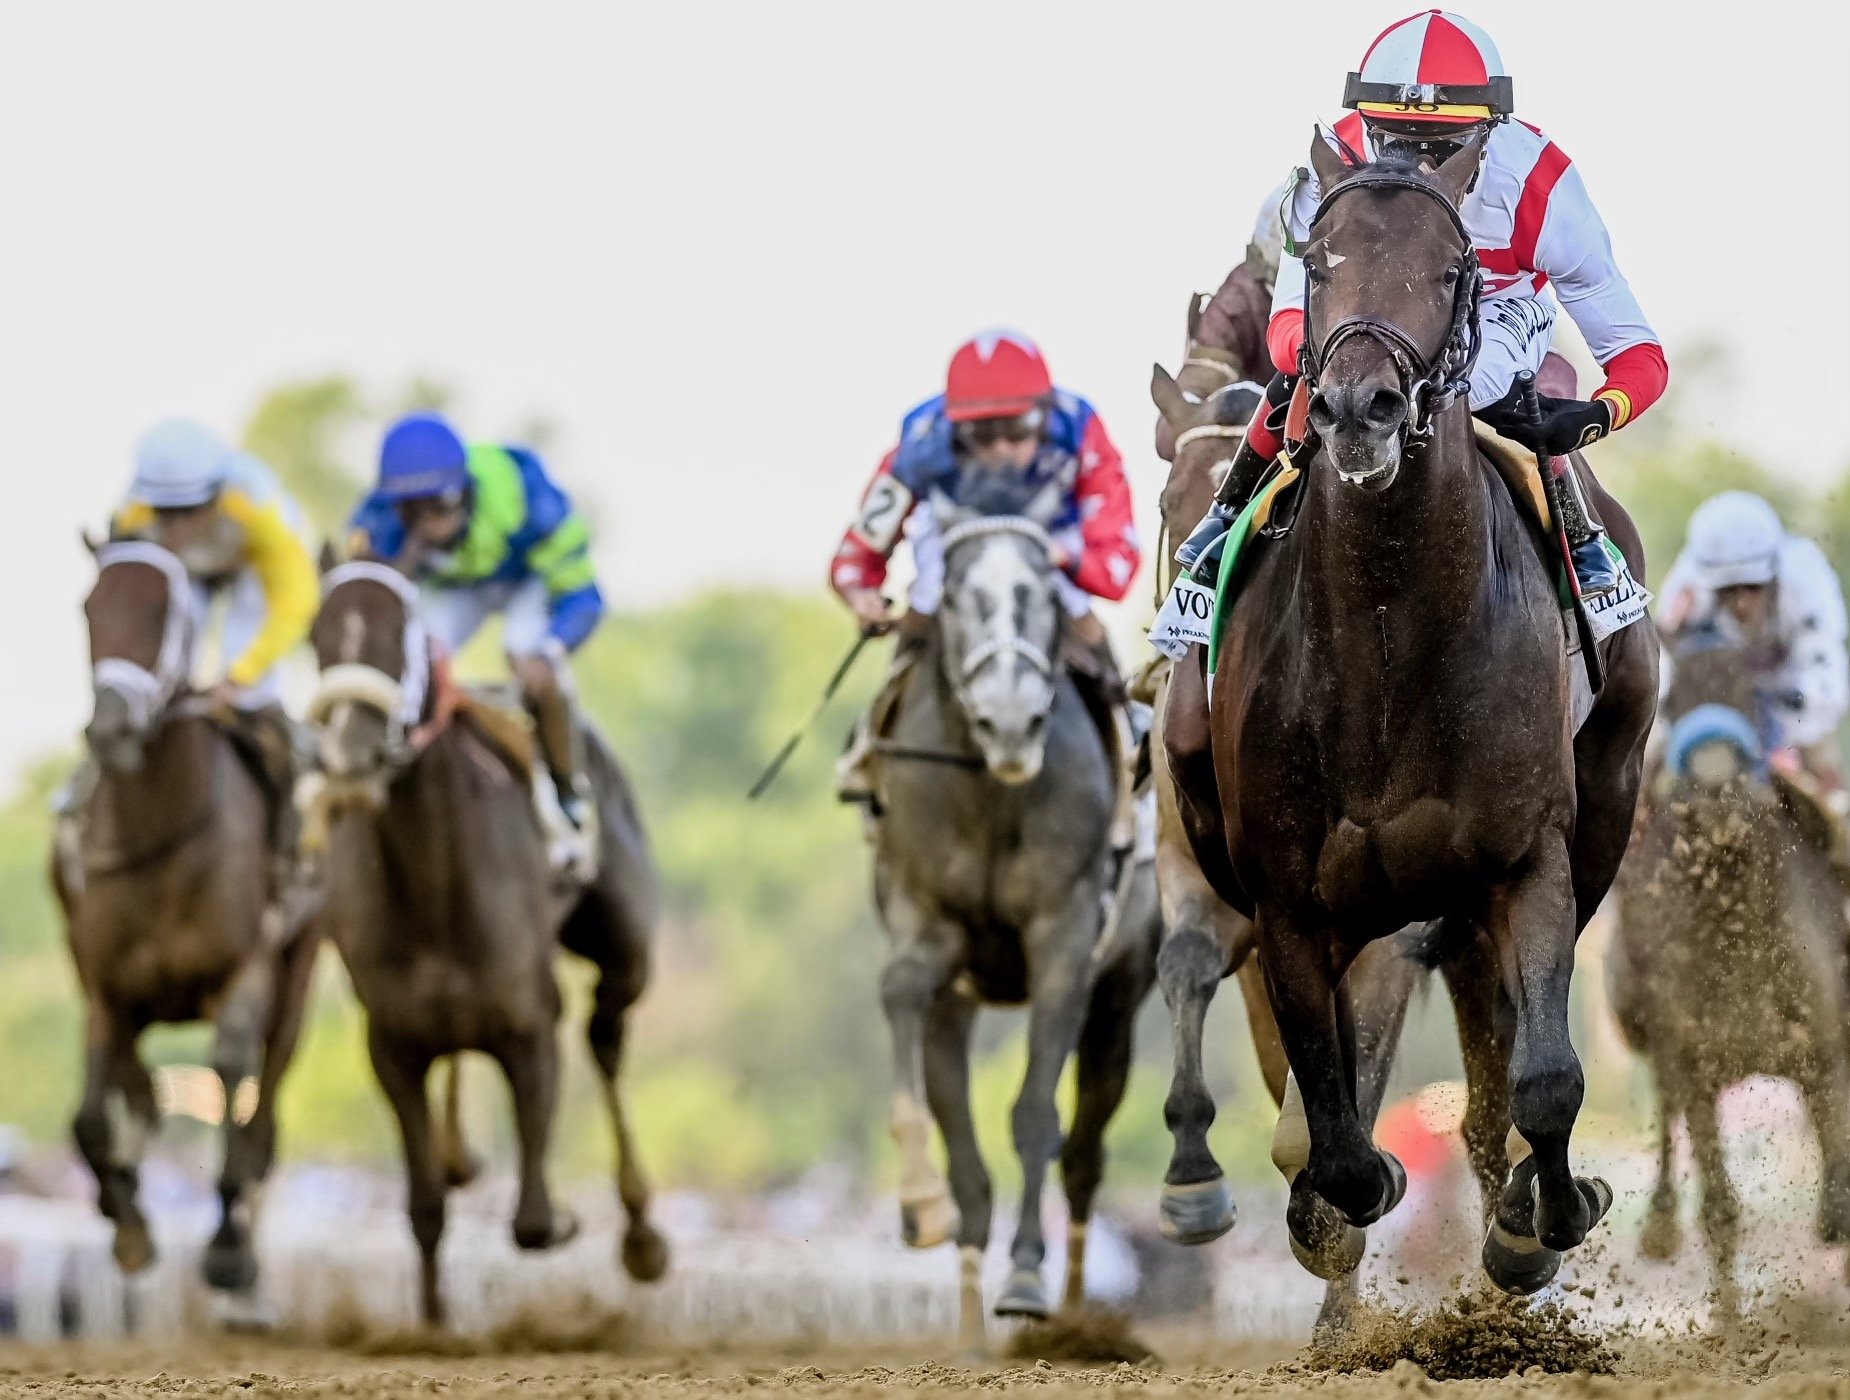 preakness-handle-down-from-2021;-belmont-unlikely-for-early-voting,-epicenter